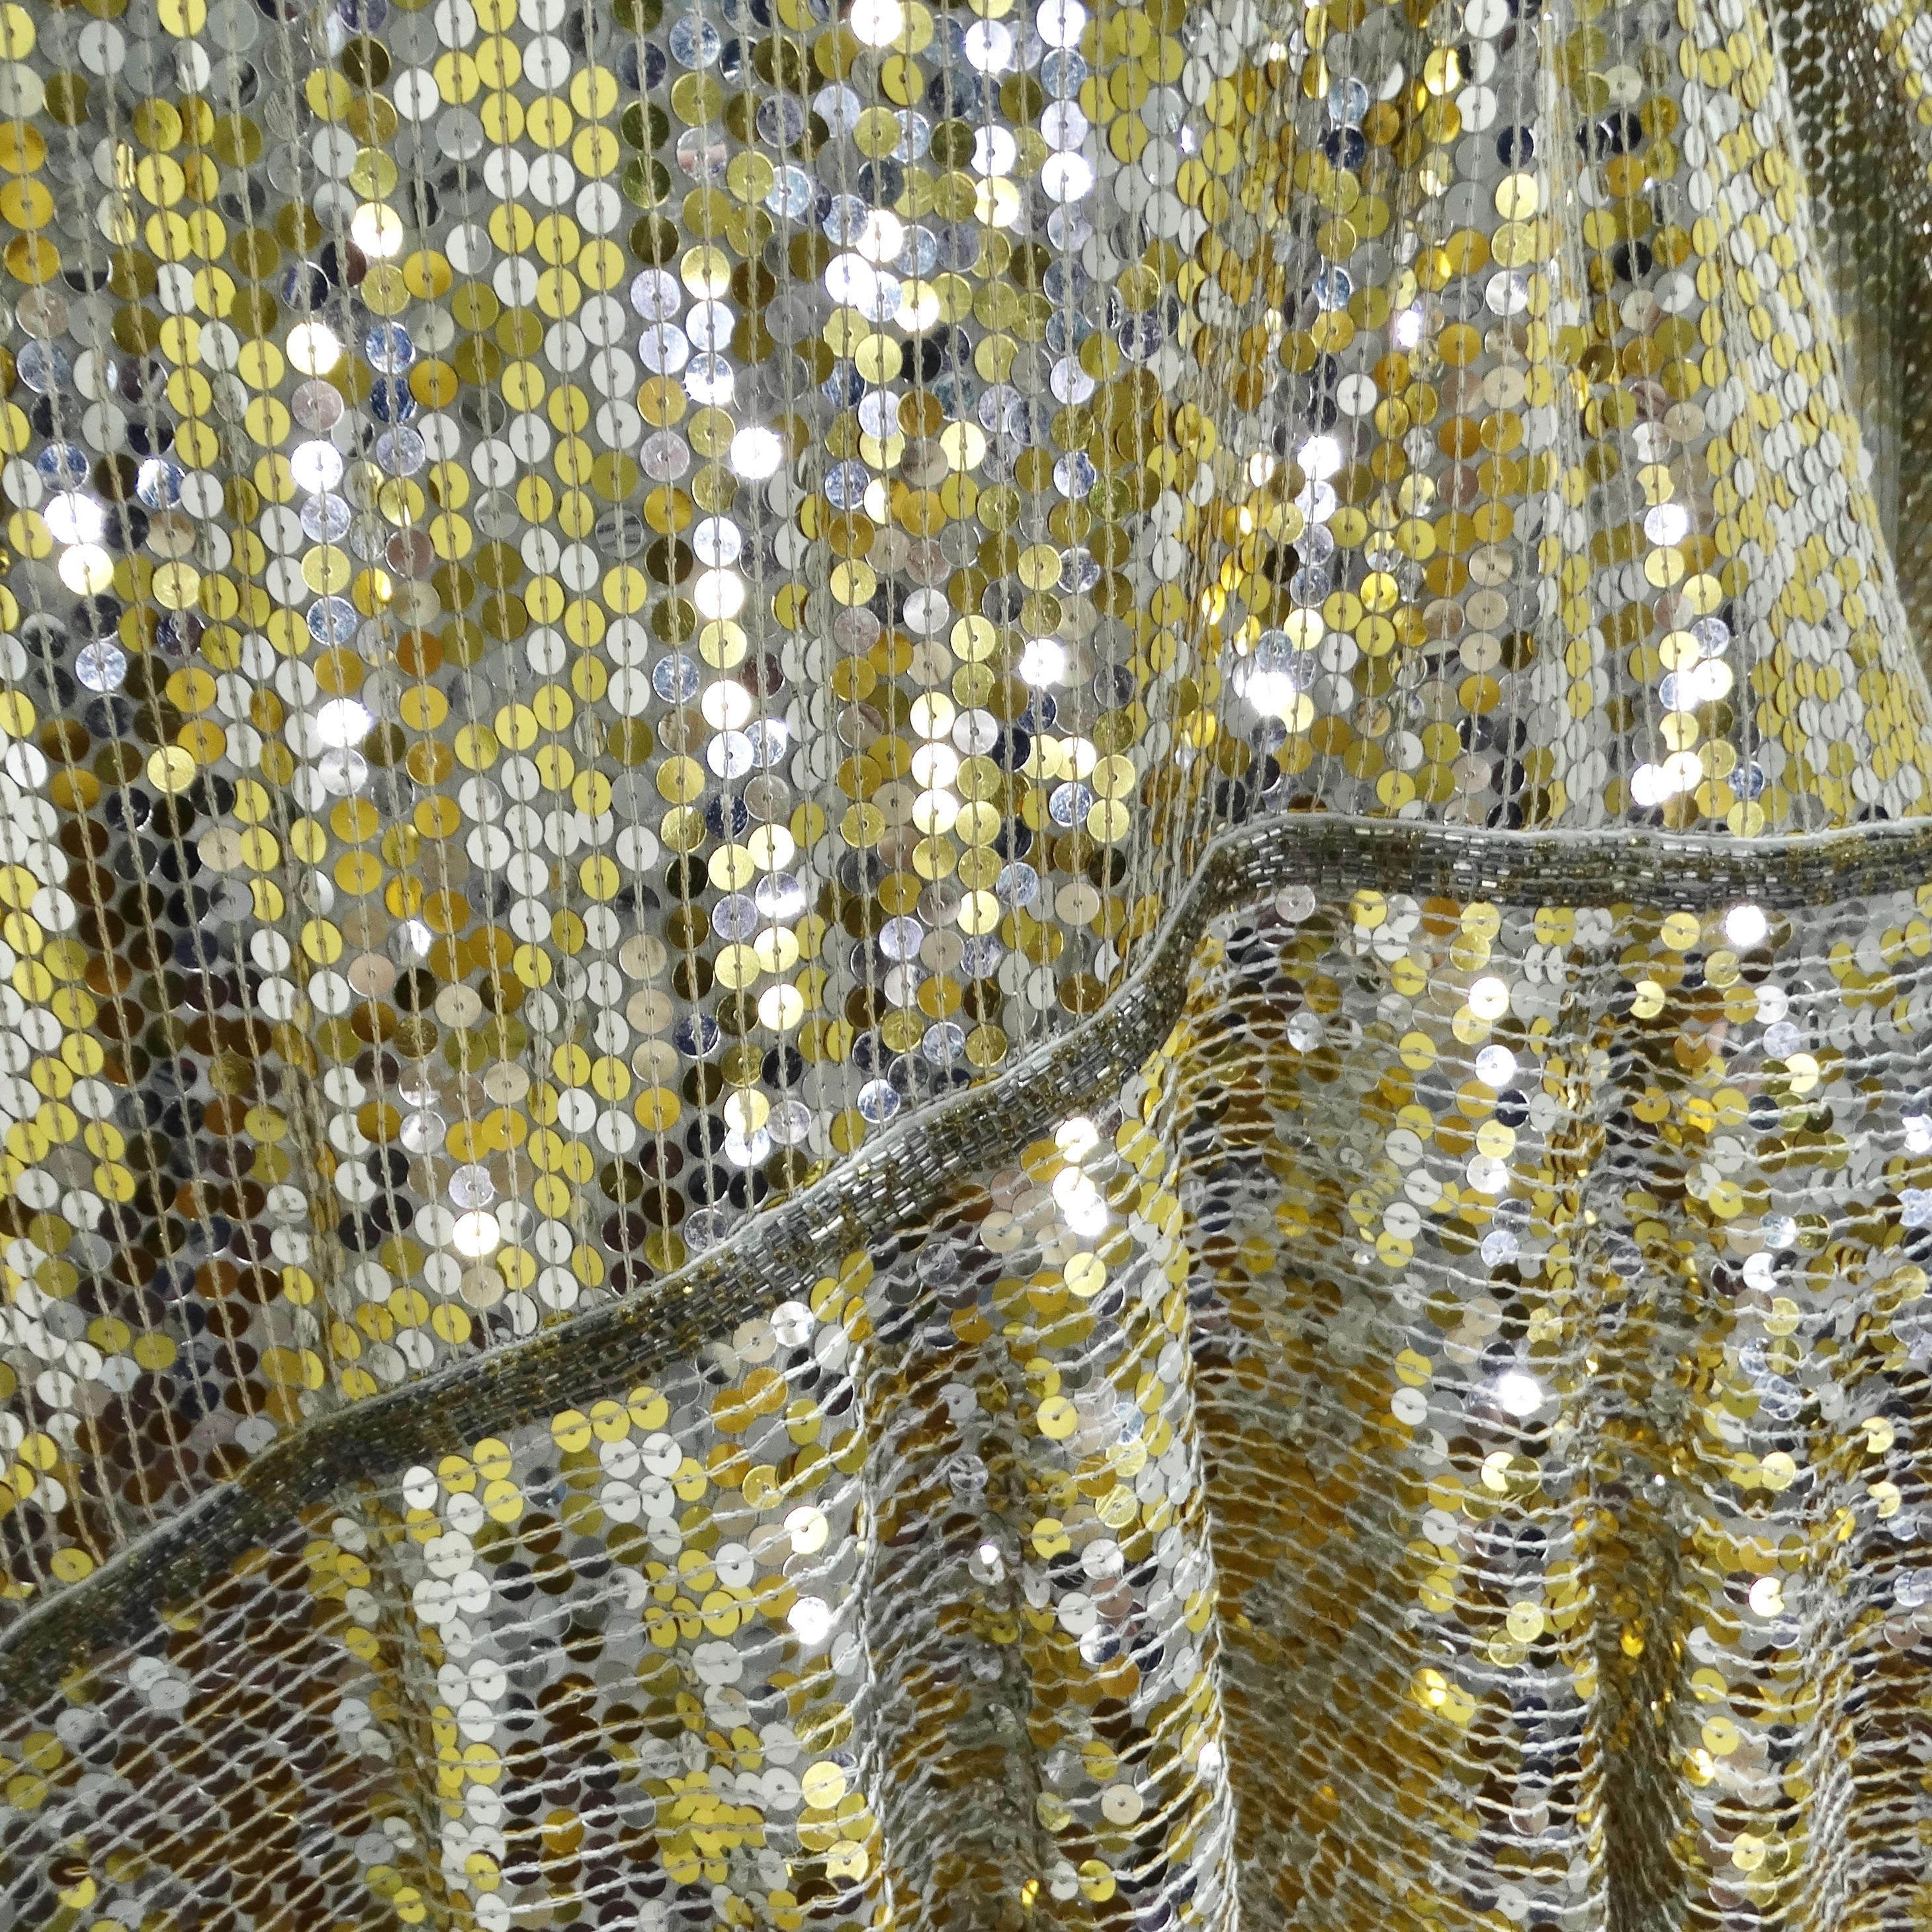 1980s Capriccio Gold Sequin Embellished Dress, Shawl & Belt Set In Excellent Condition For Sale In Scottsdale, AZ